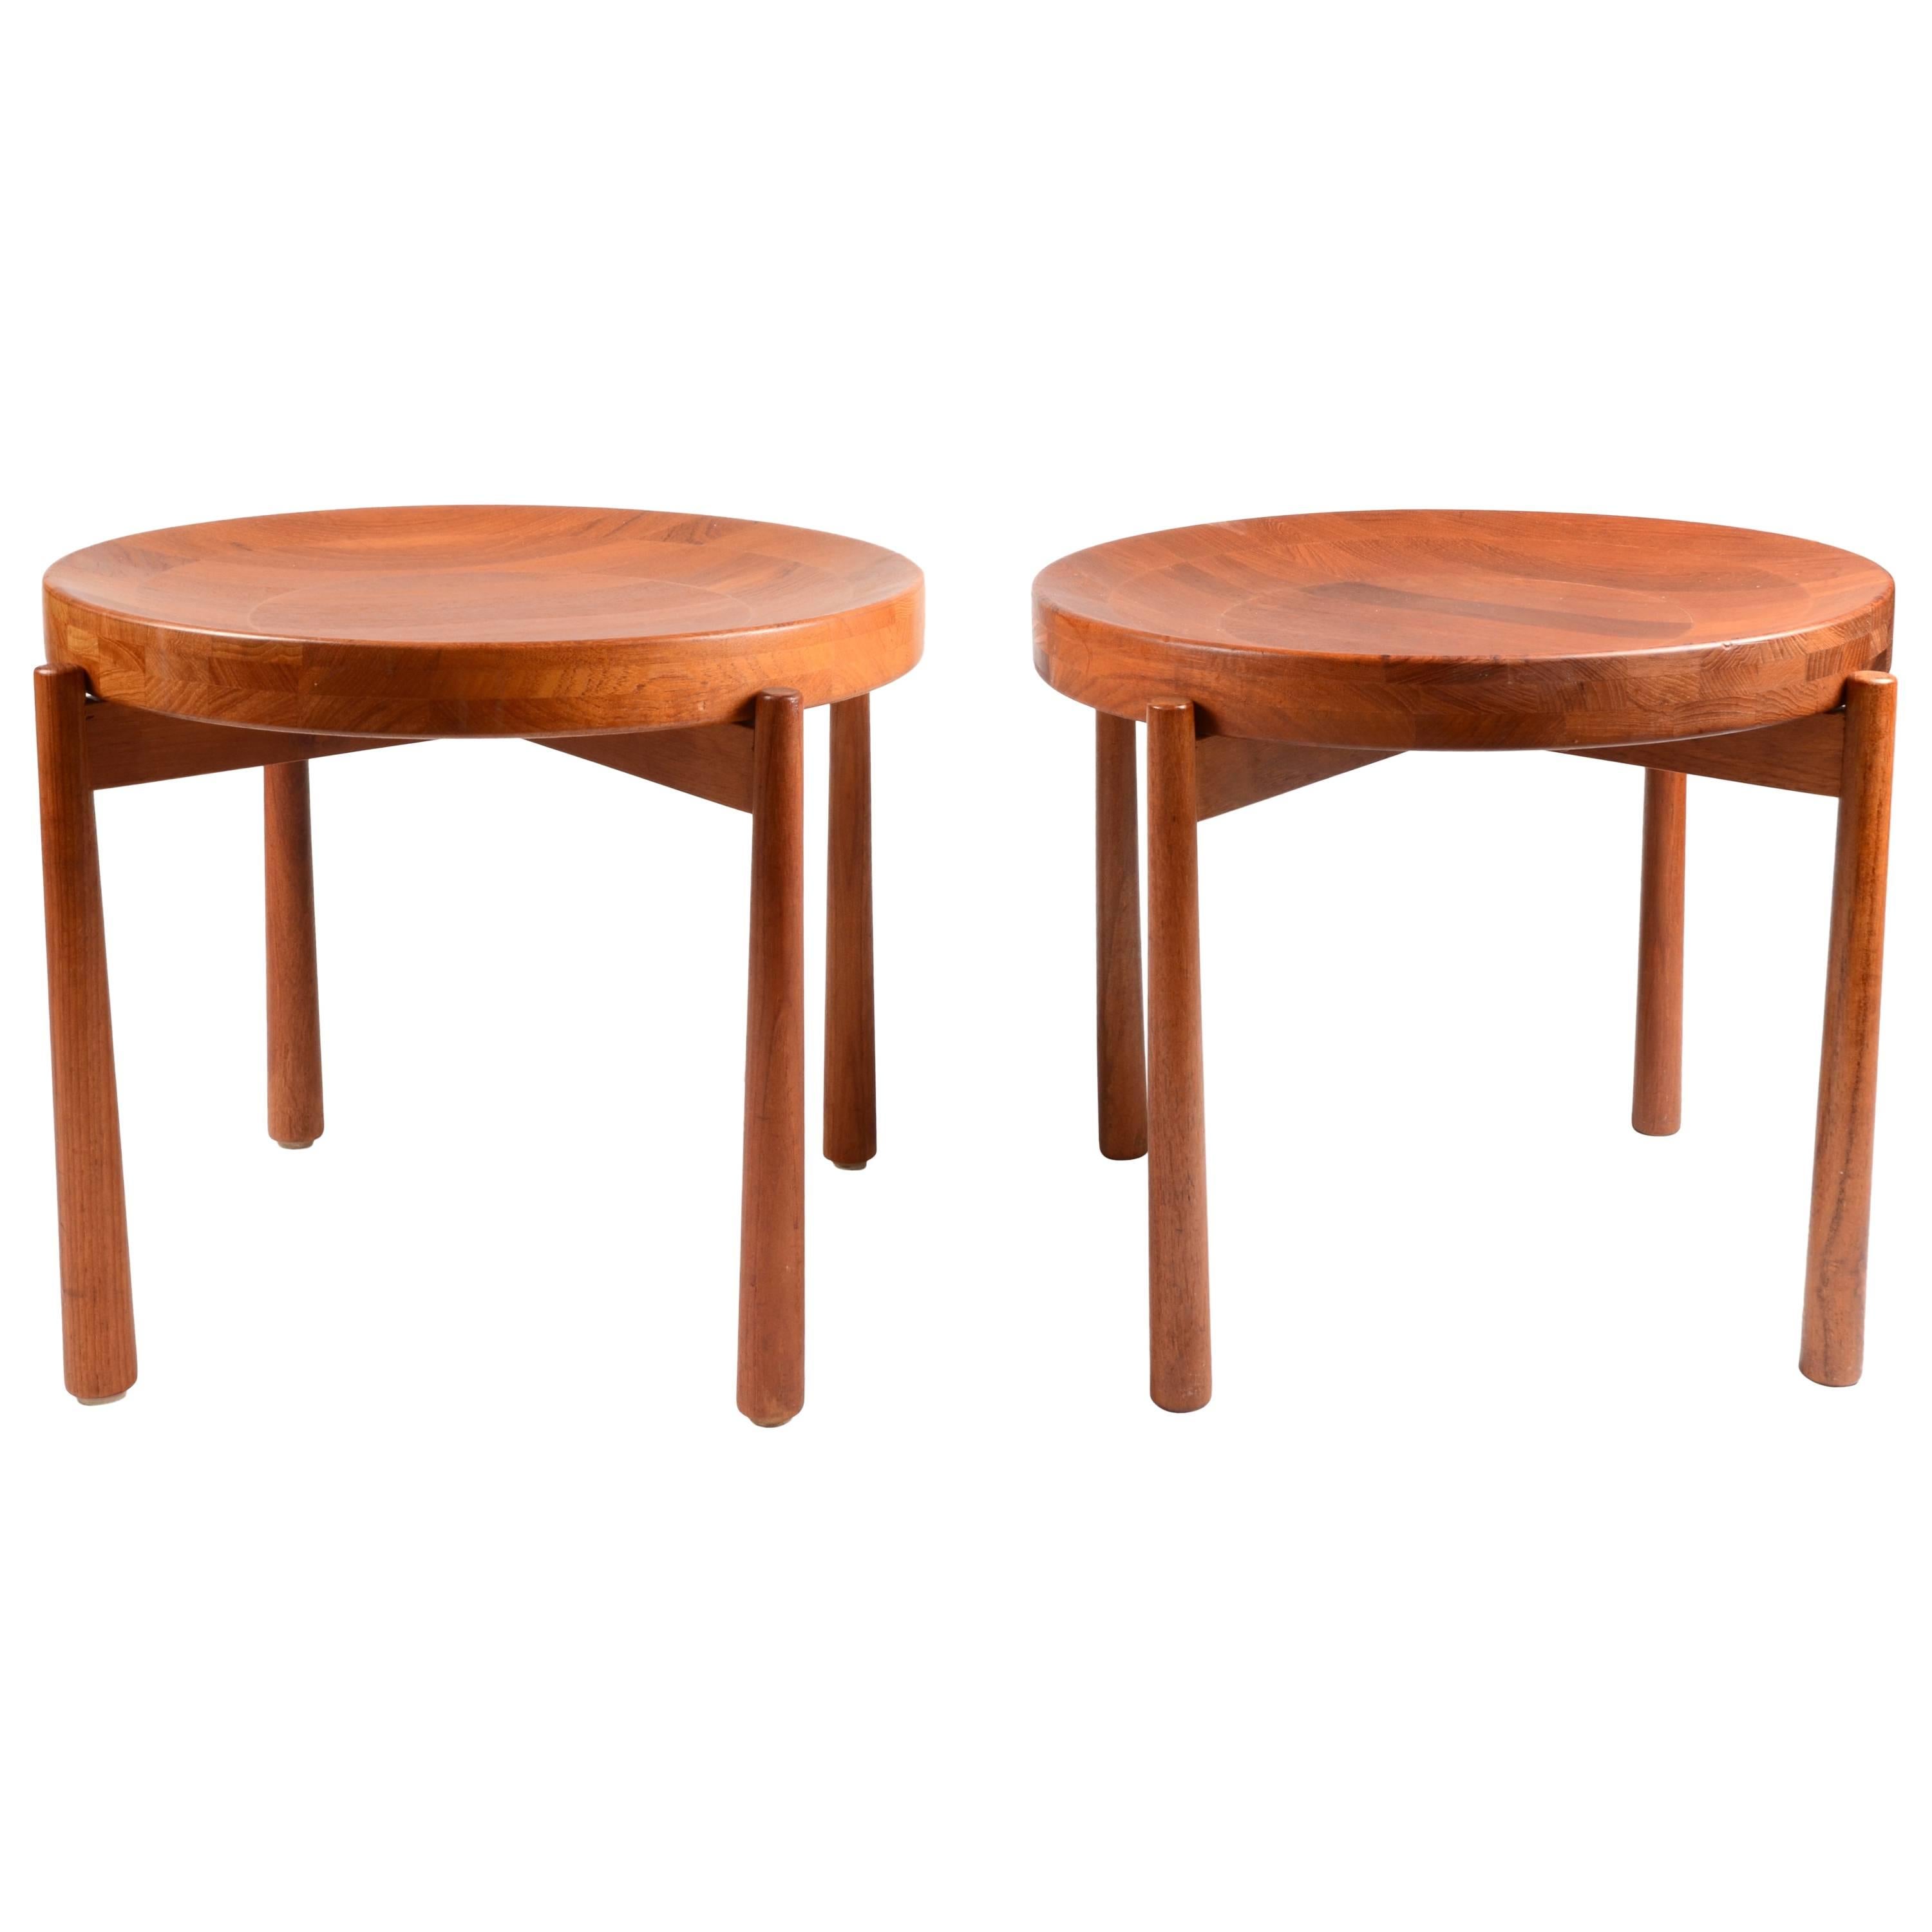 Pair of Tray Tables, in the Style of Jens Quistgaard, Denmark, Mid-1900s